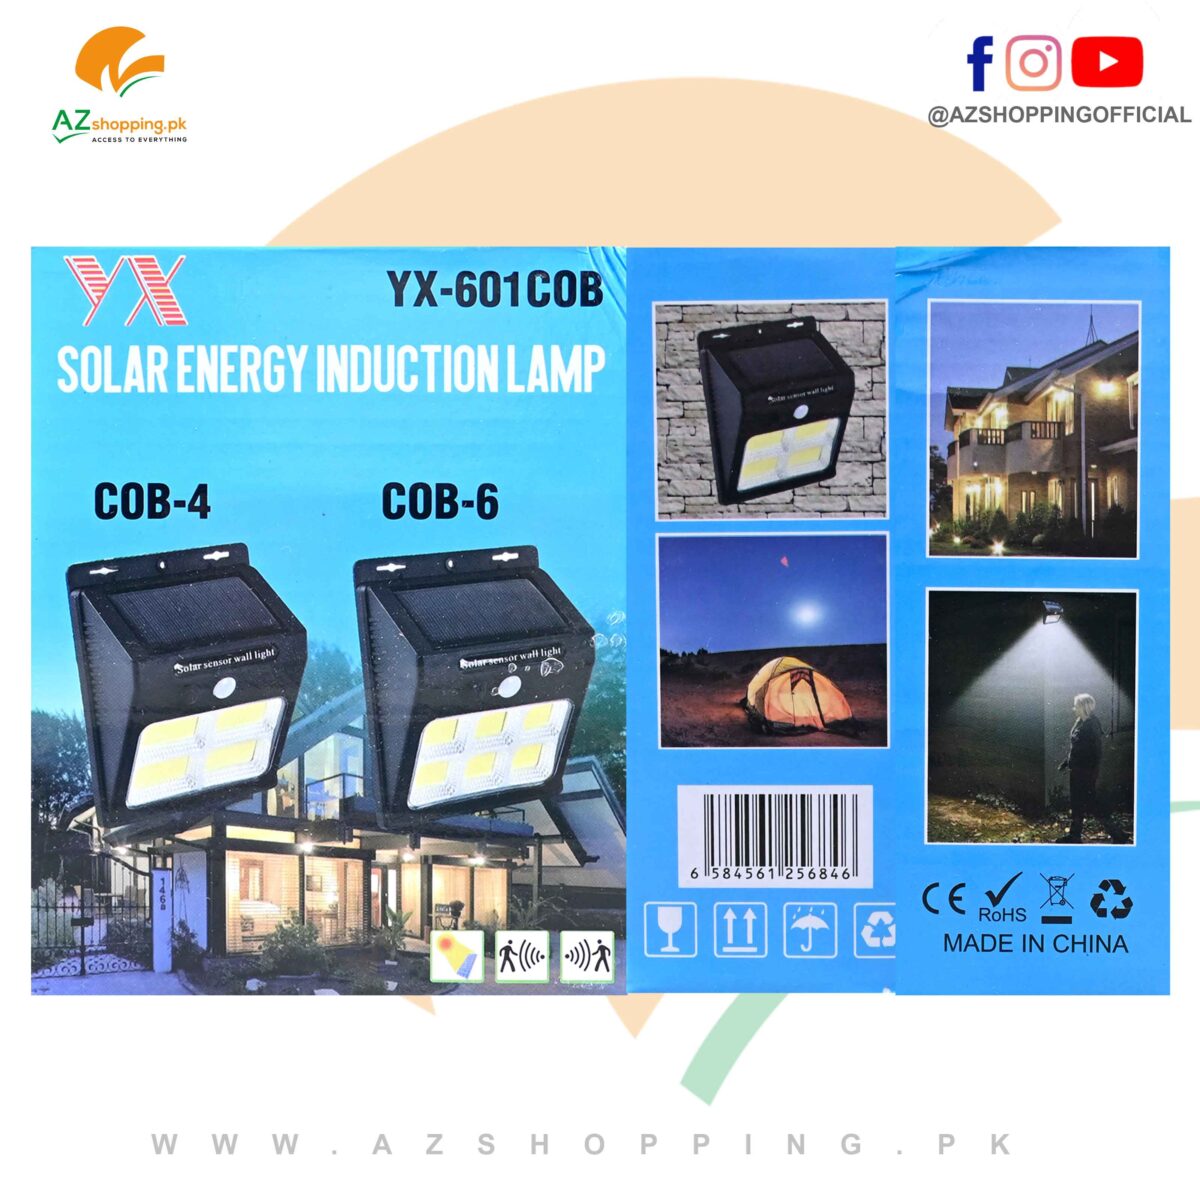 Solar Energy Induction Lamp Streep Light Wall Lamp Flashlight, Zero Electricity Charges with Built-in Solar Rechargeable Battery, with Human Induction, Intelligent Lighting Control, Waterproof – Model: YX-601COB